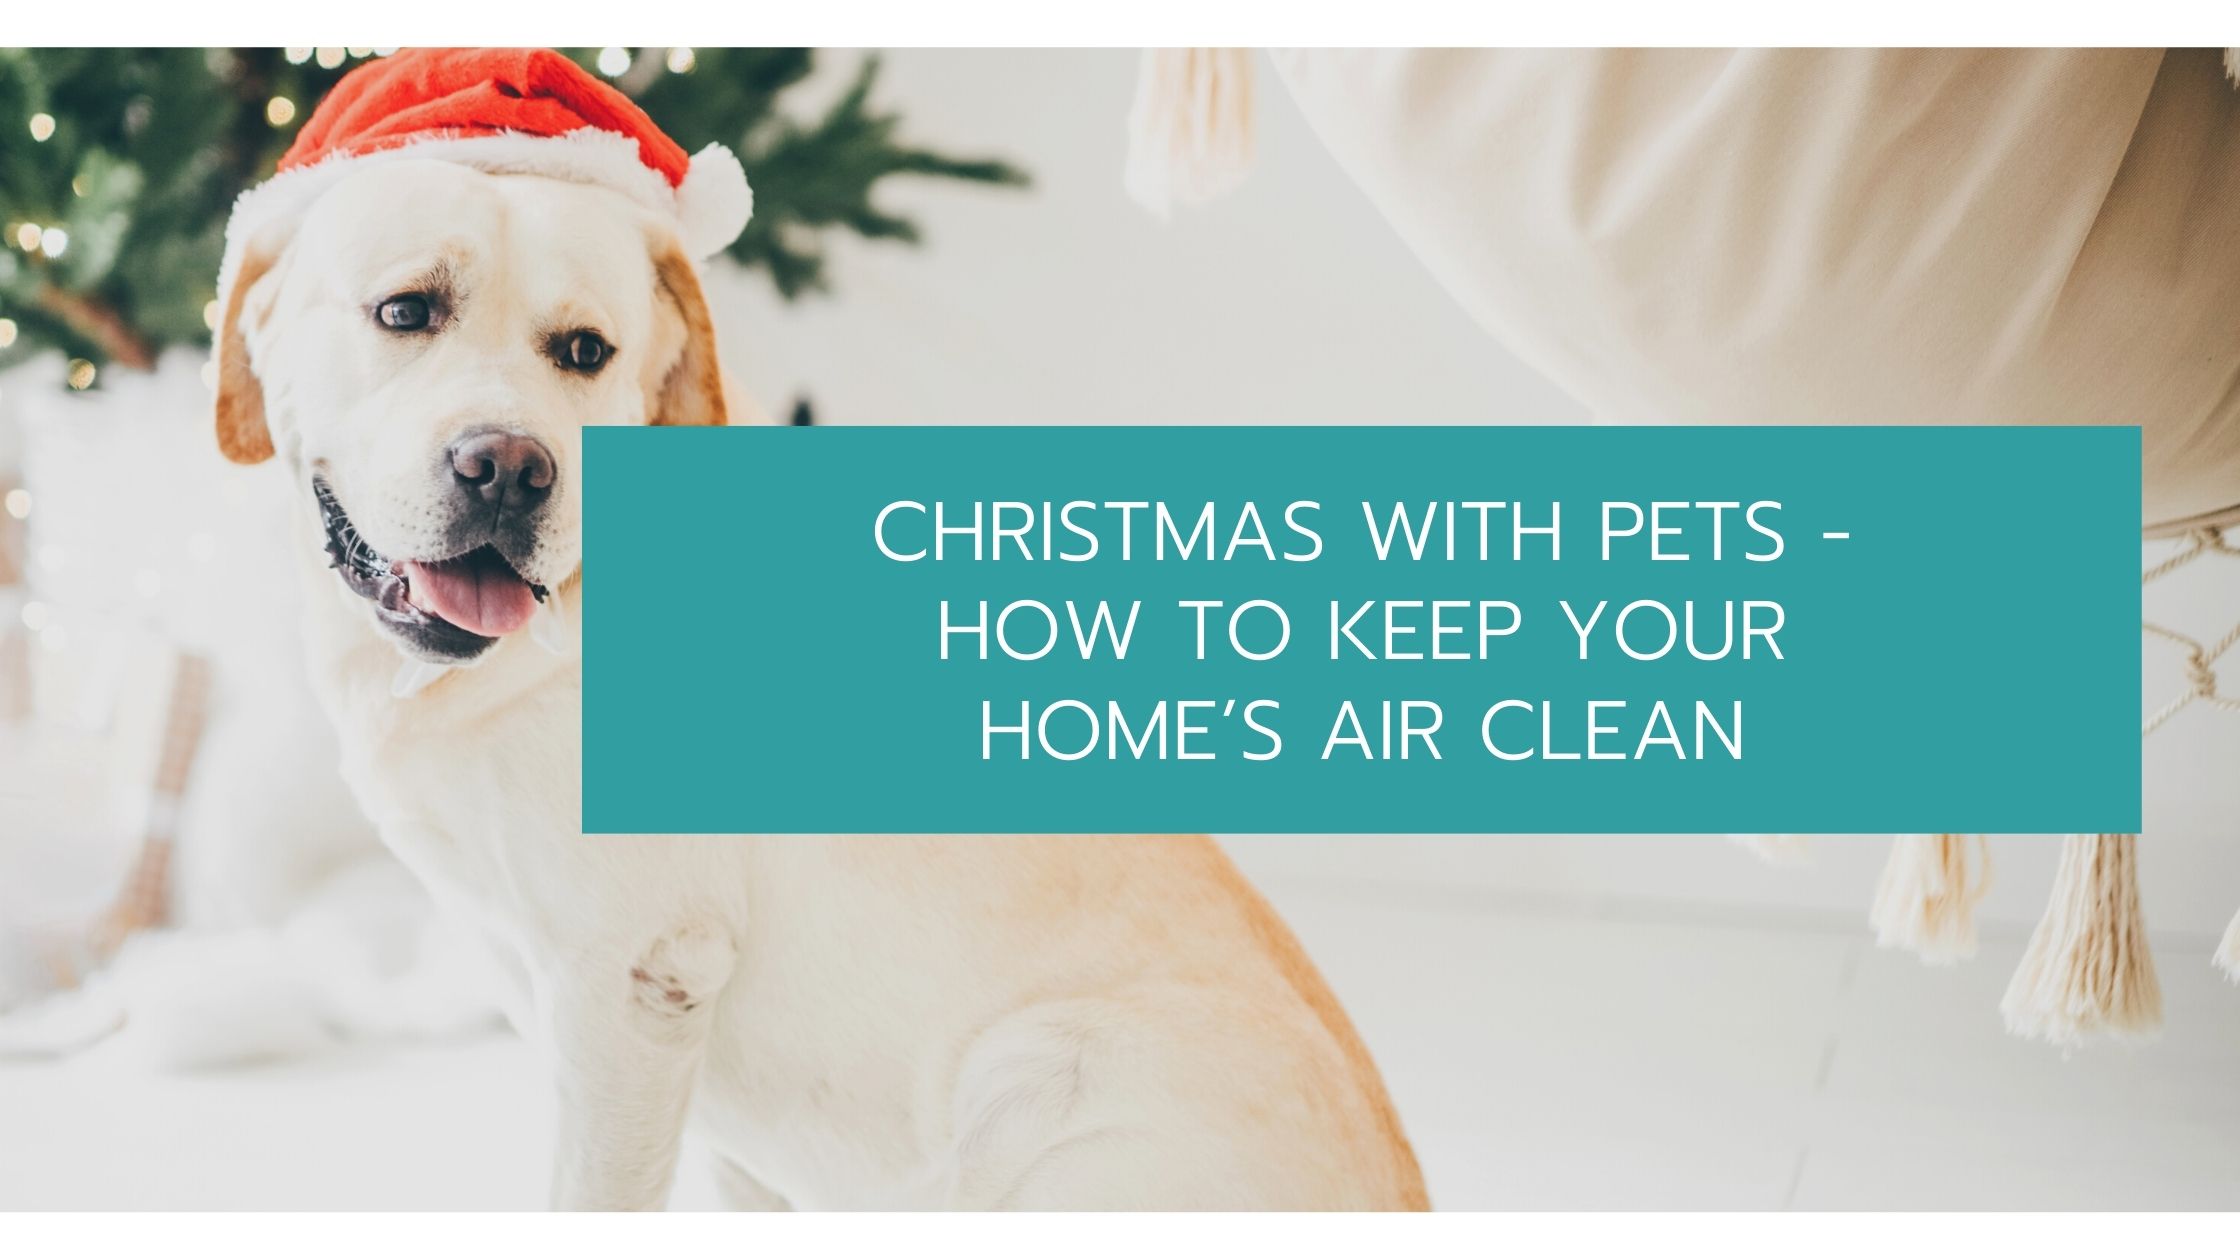 Christmas With Pets - How to Keep Your Home’s Air Clean